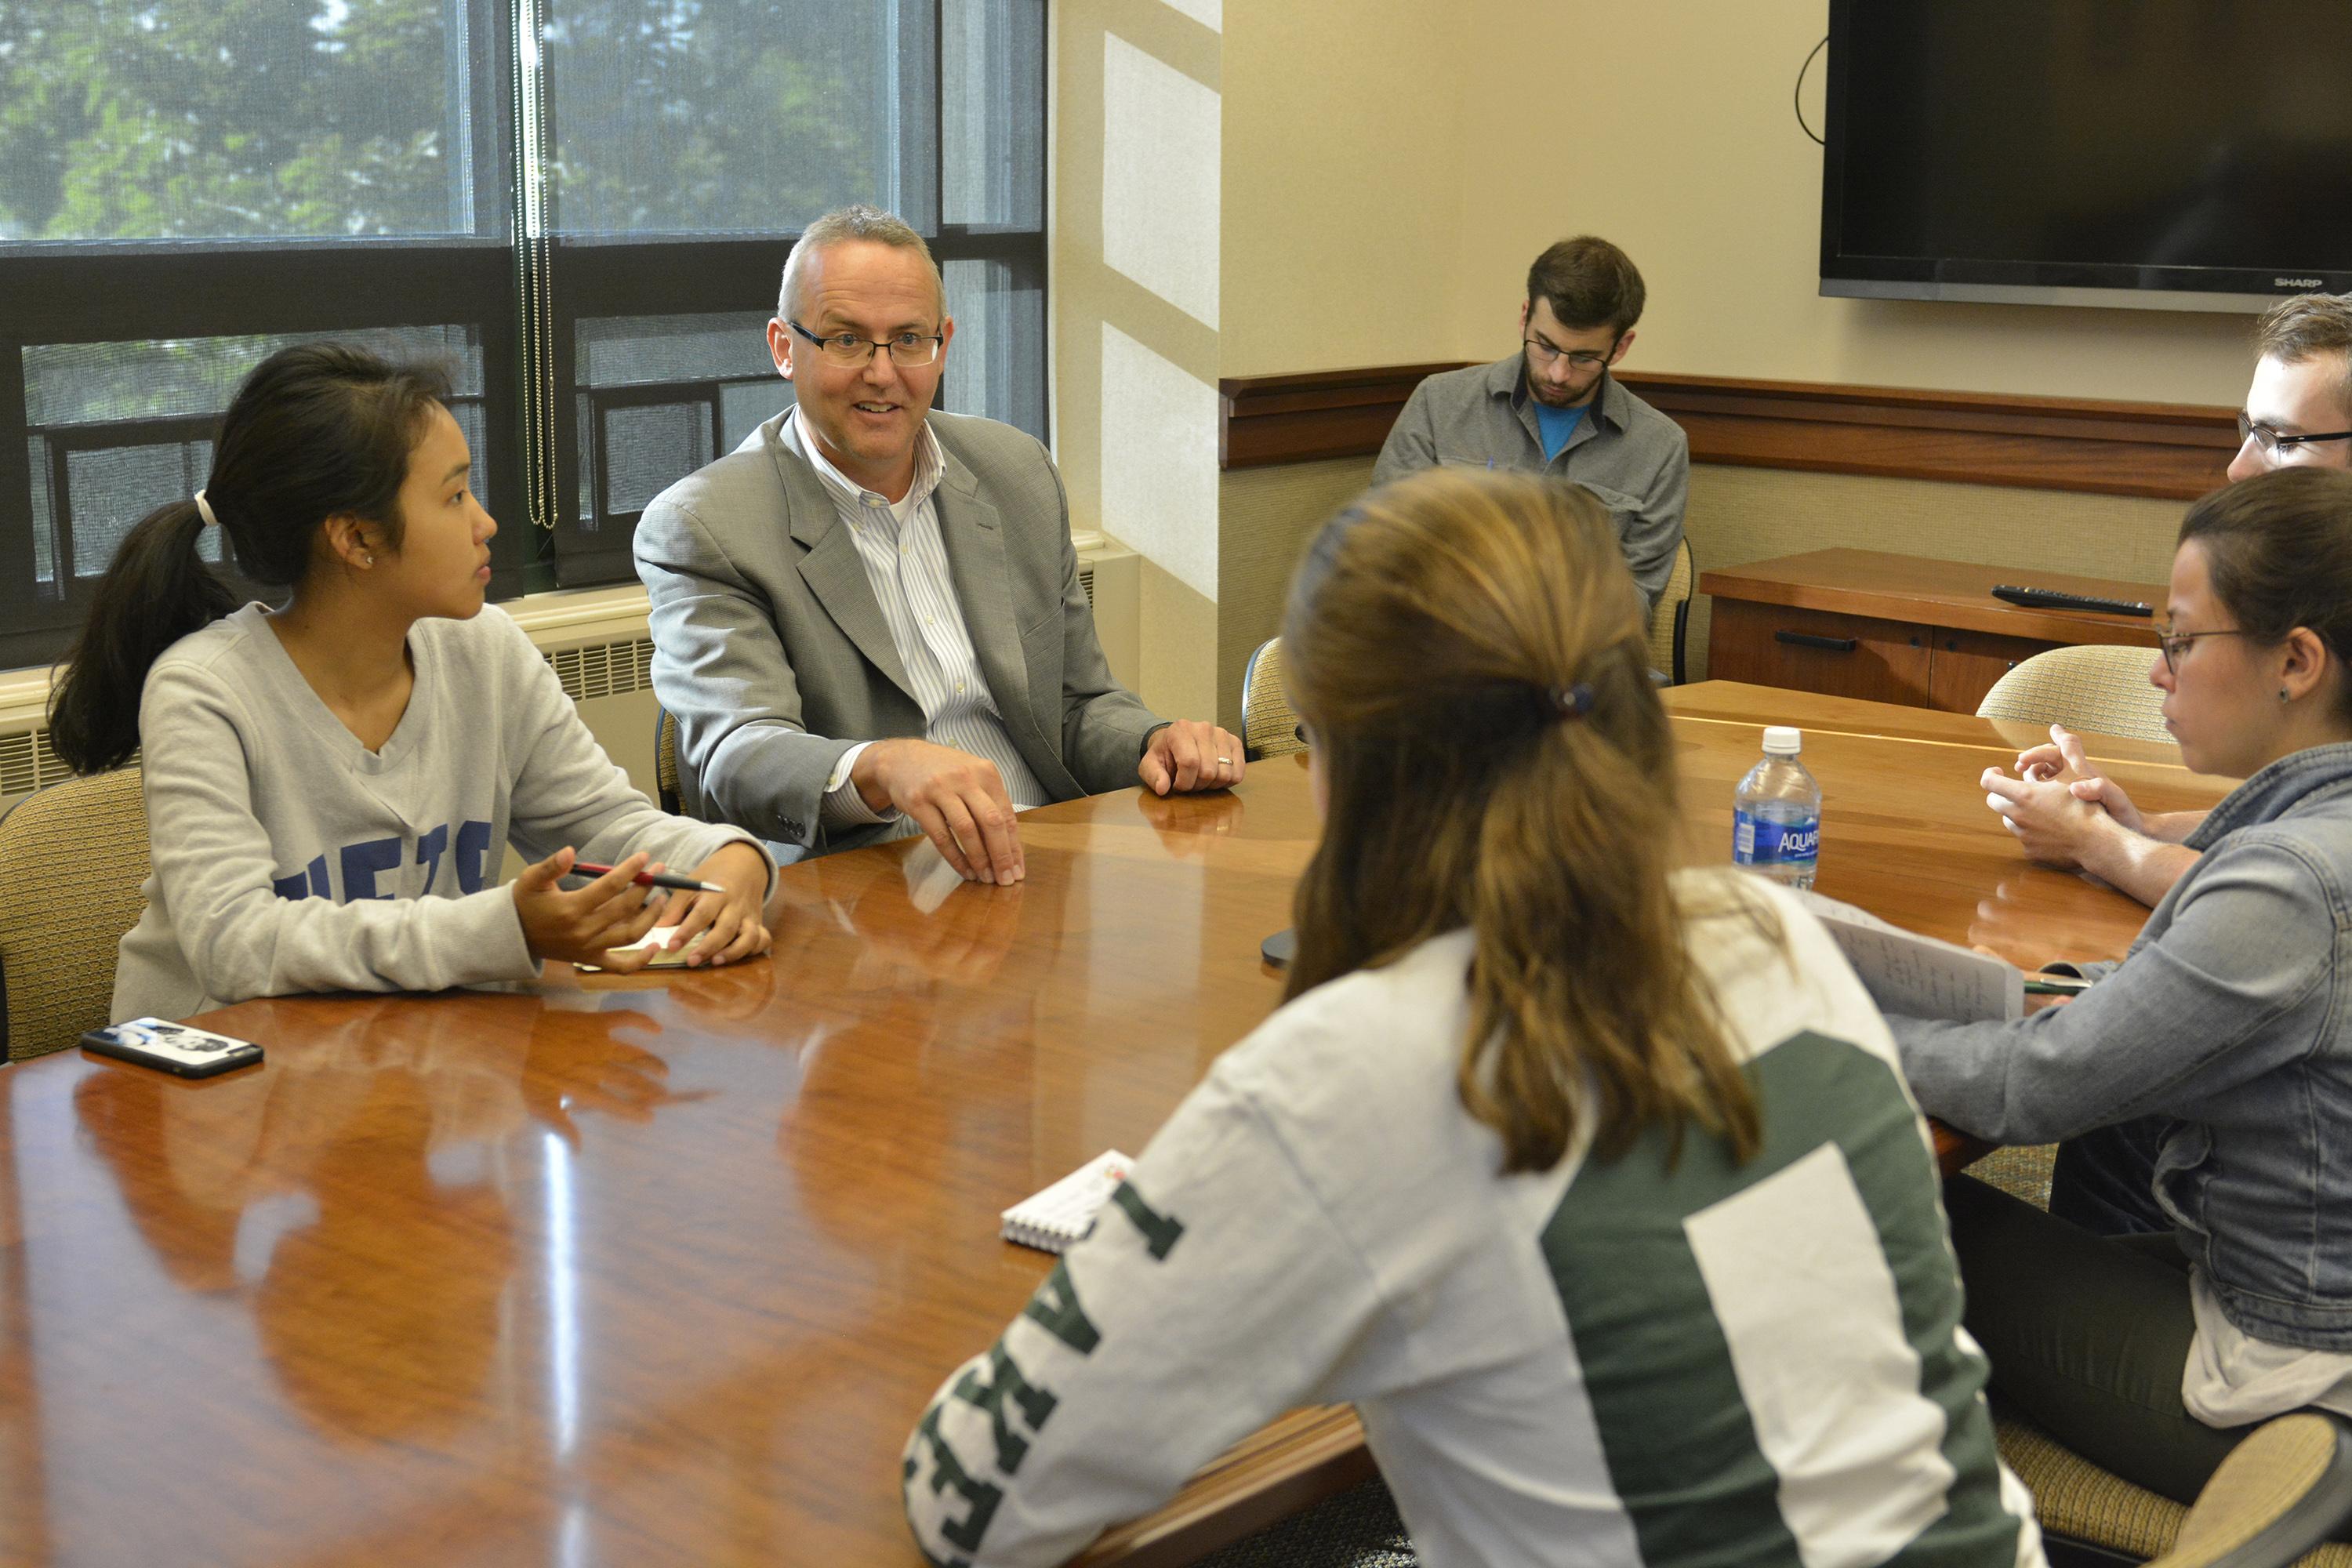 School of Business alumnus Kevin Stickles working with students